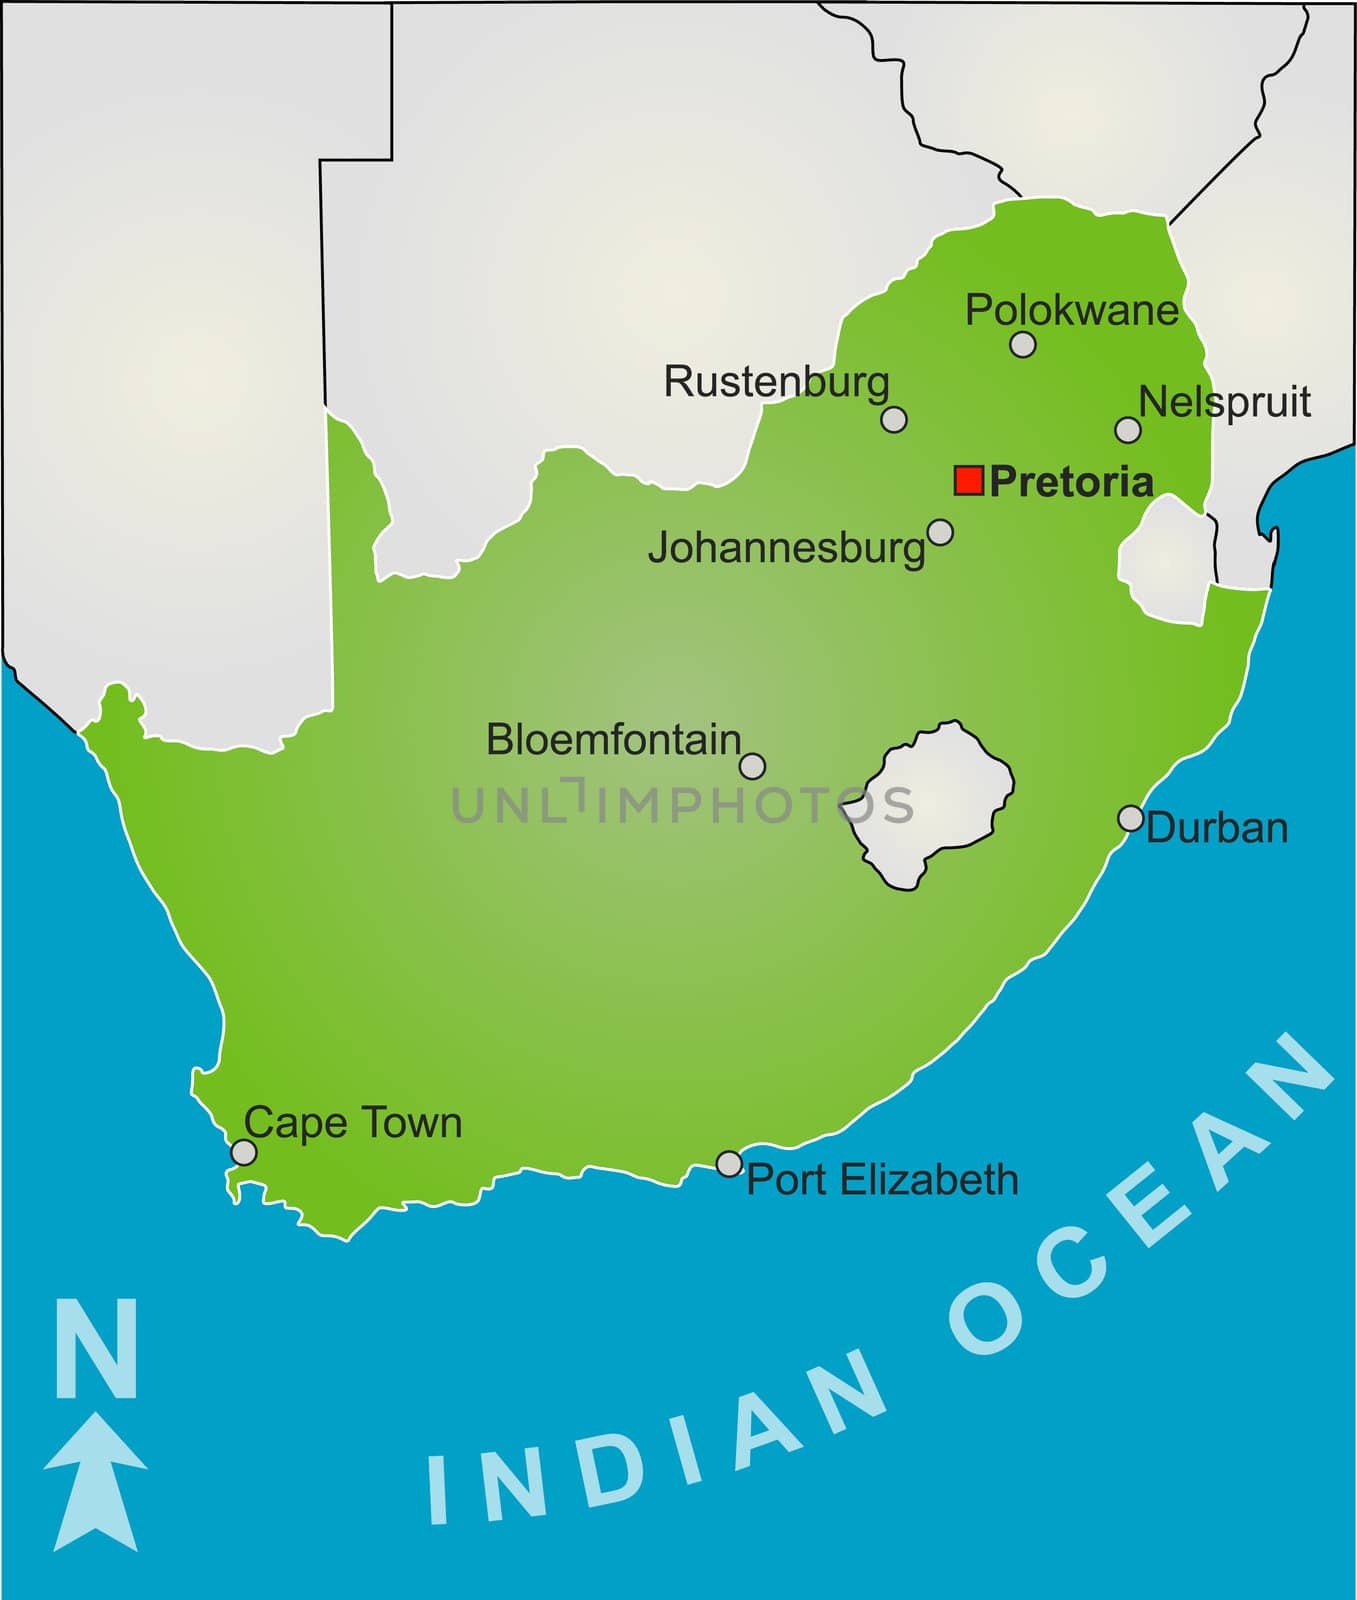 A stylized map of South Africa showing all playing venue of the soccer worldcup 2010.